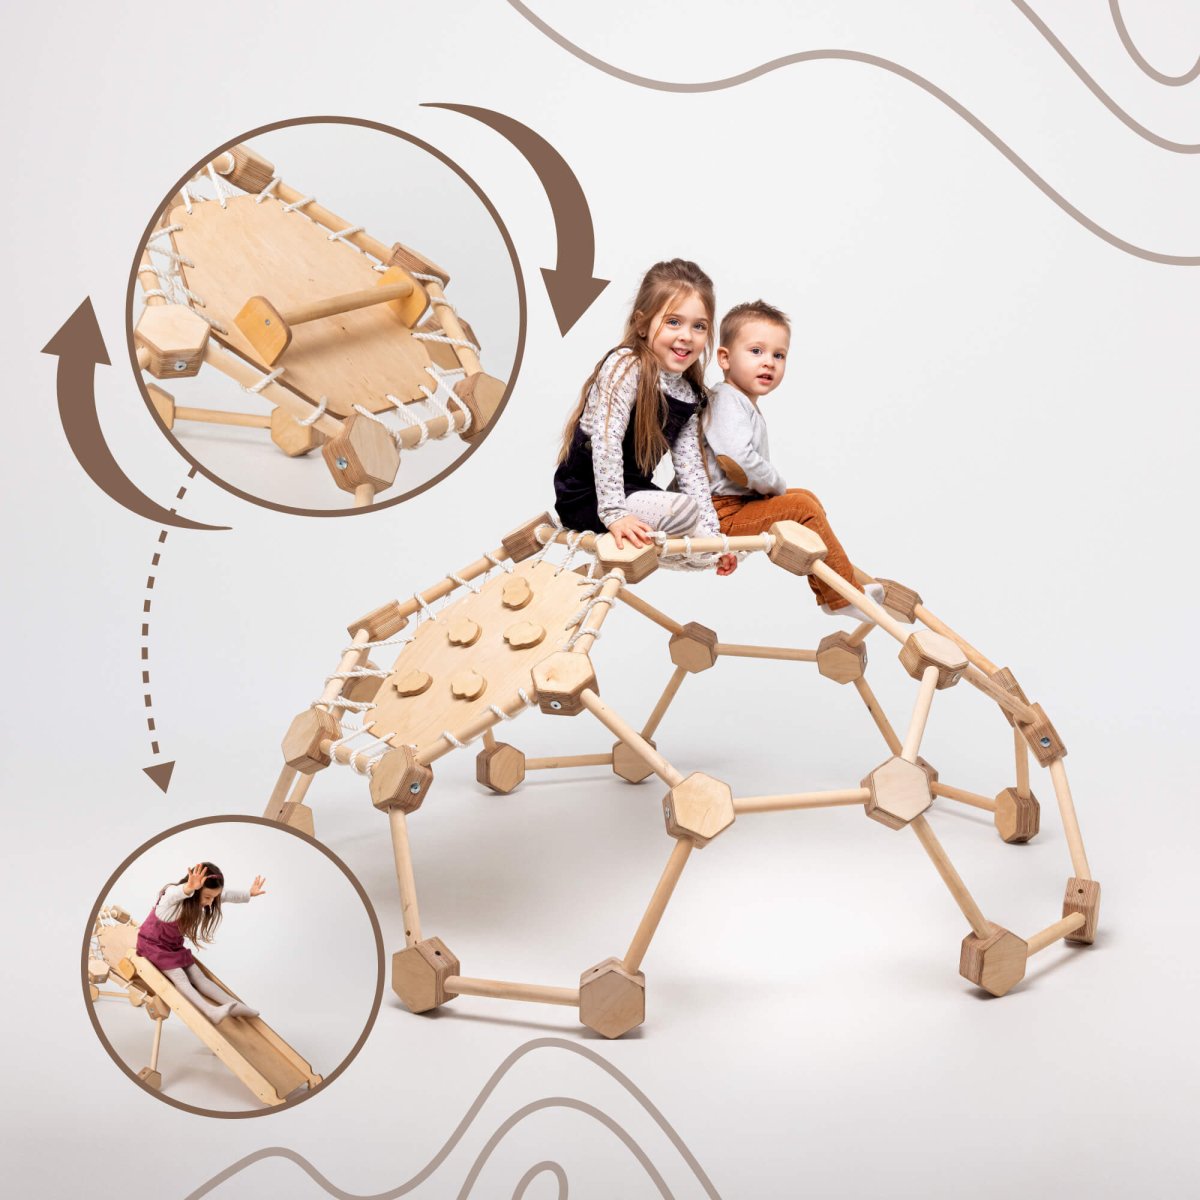 Wooden Climbing Frame Geodome / Climbing Dome for Kids 2-6 y.o. Goodevas